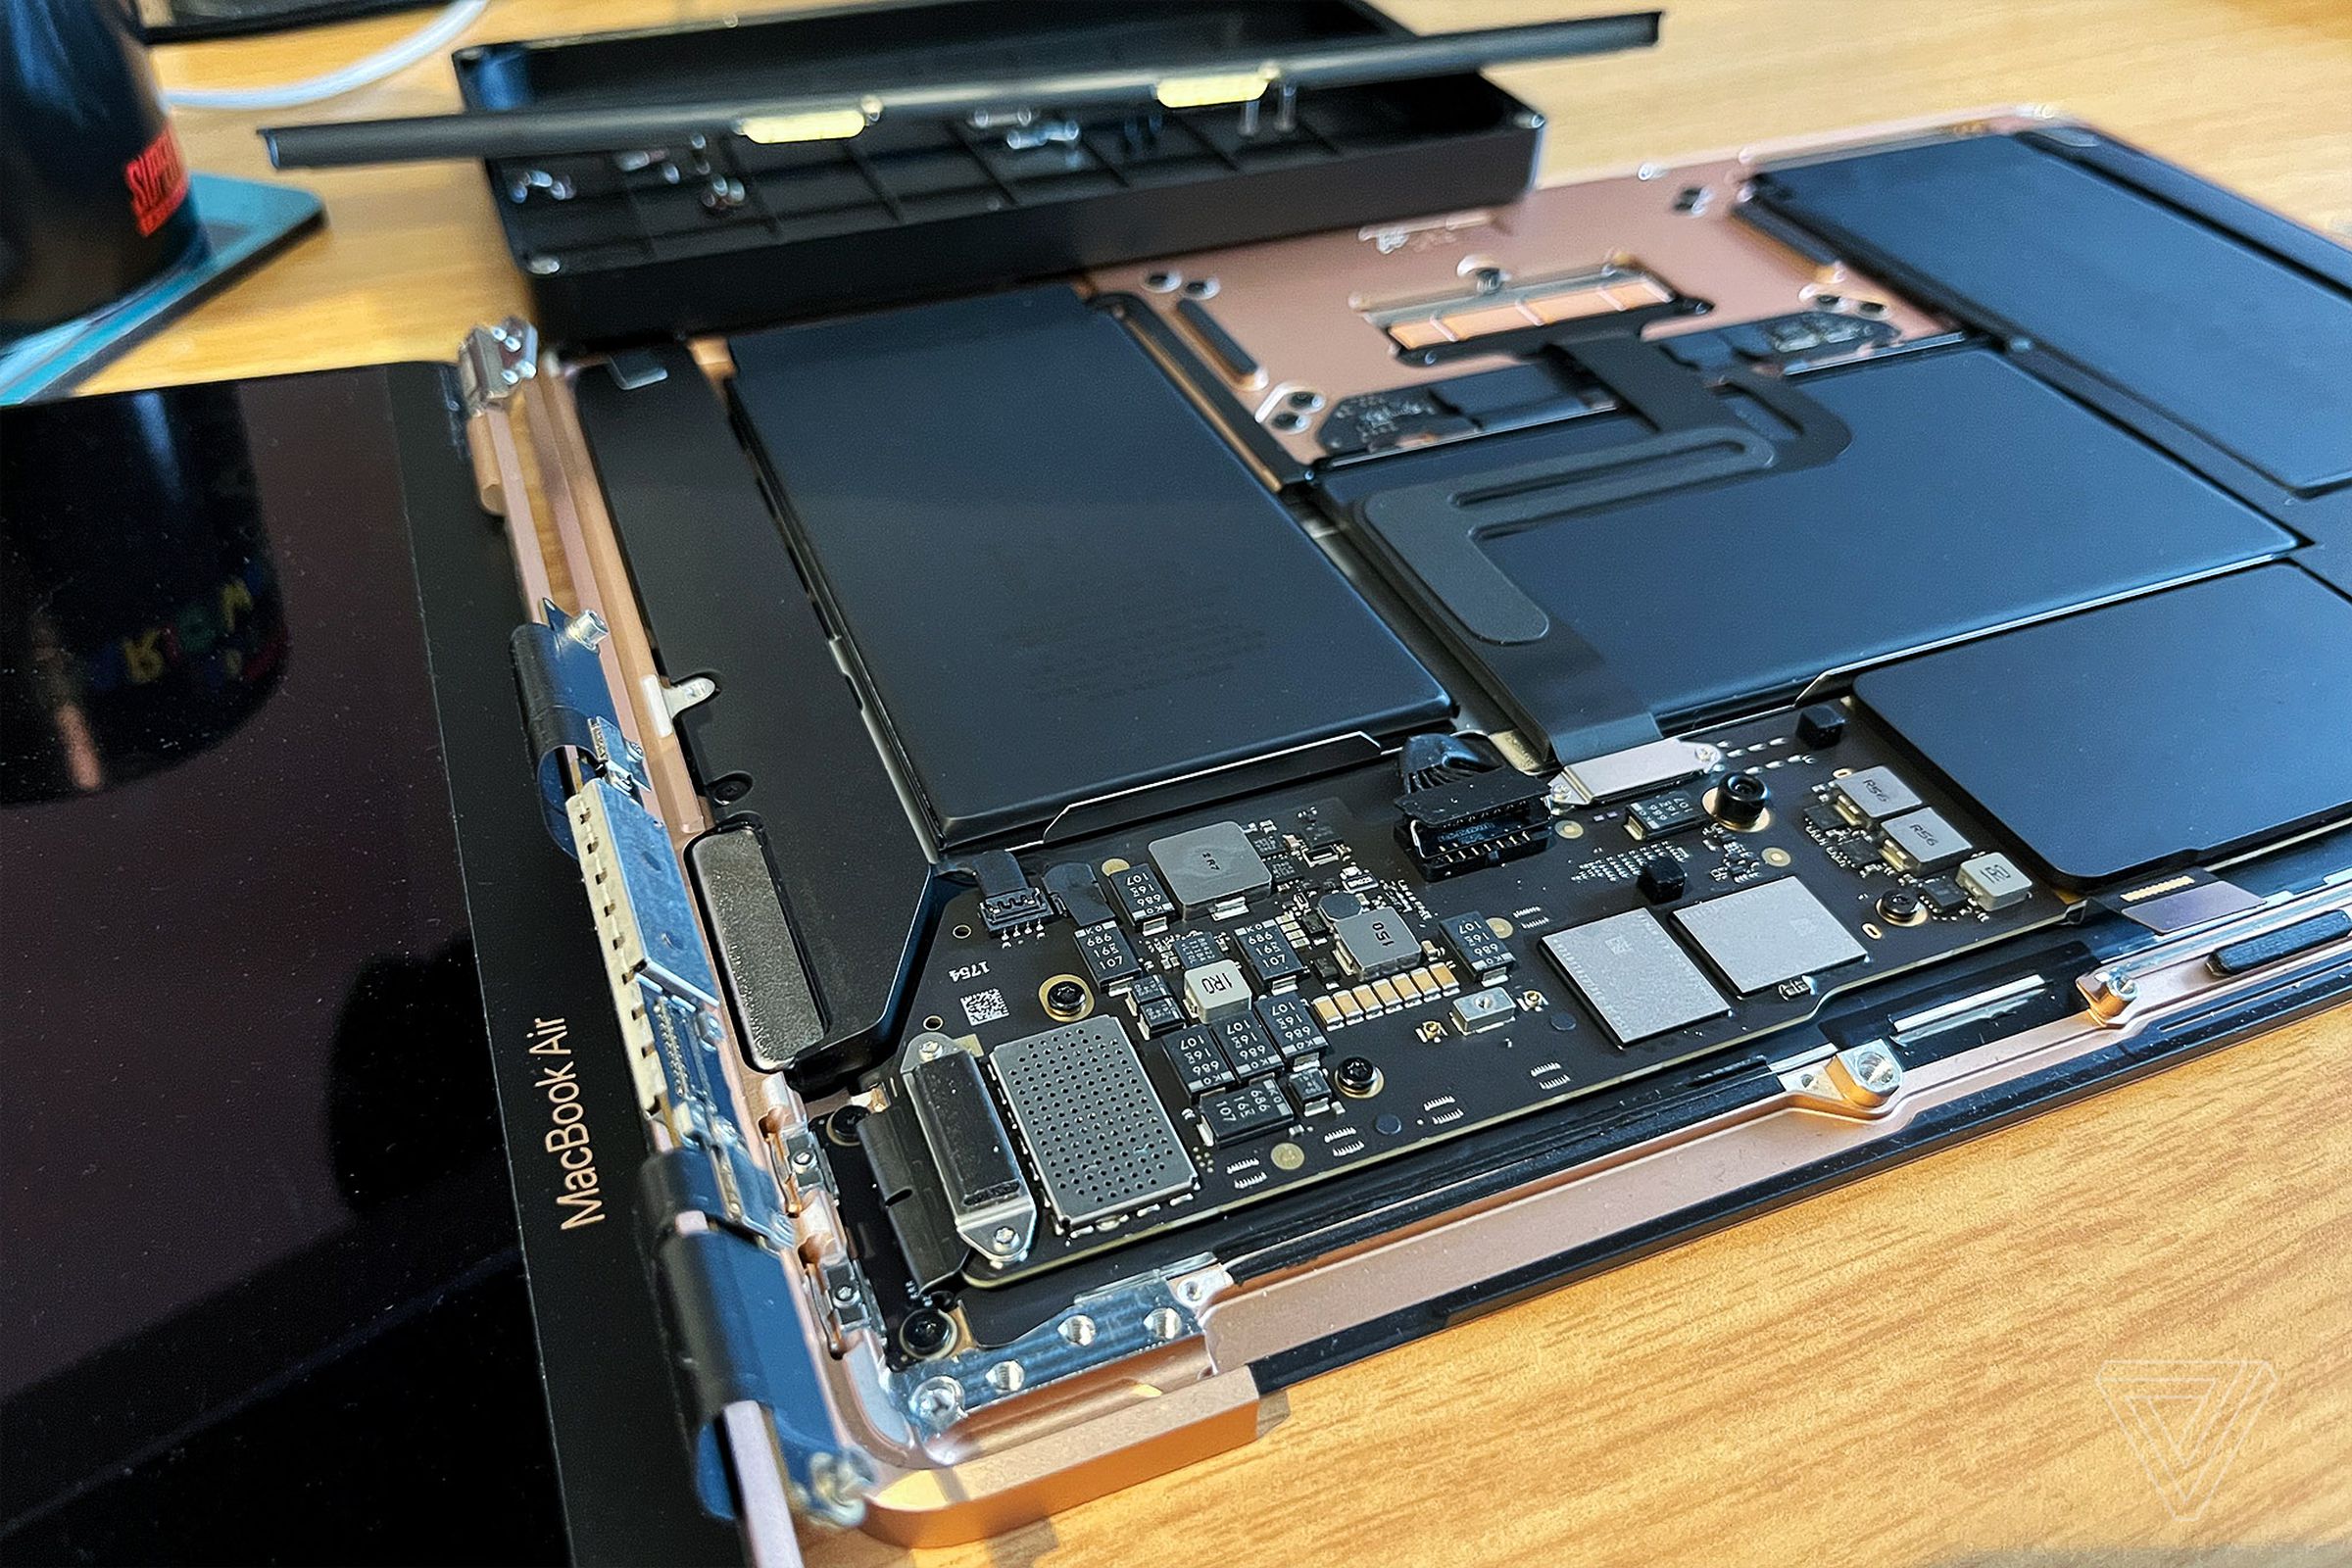 Clamshell and antenna array removed from the M1 MacBook Air.